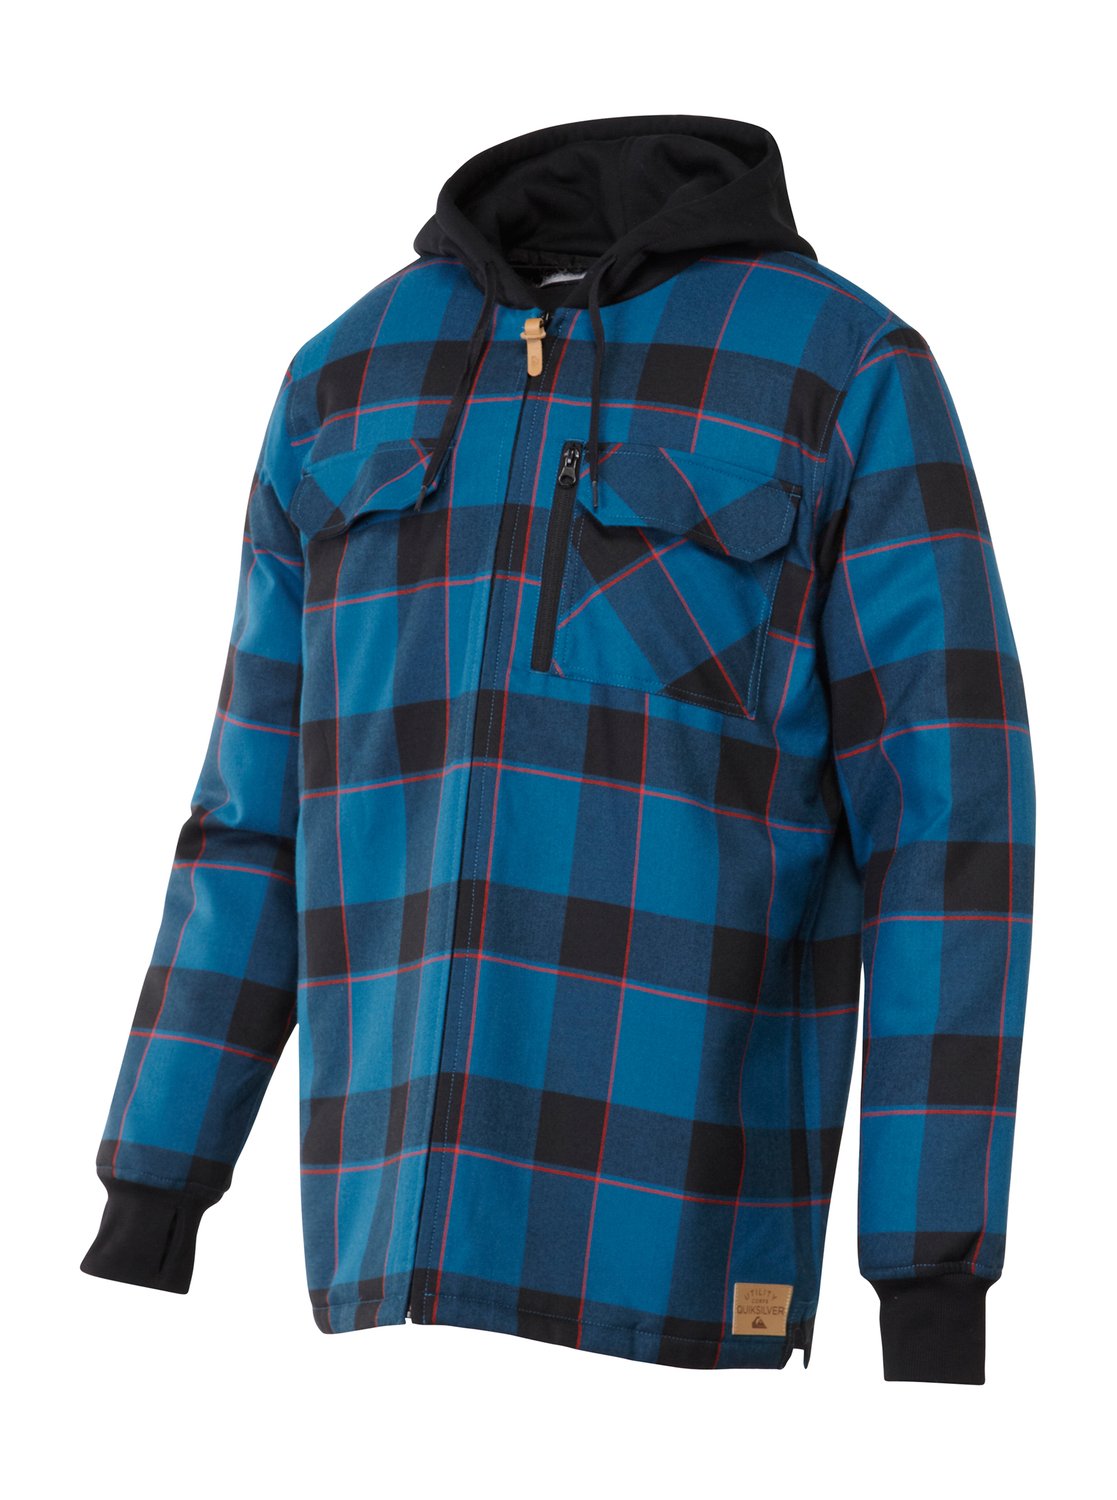 Connector Flannel Riding Shirt AQYWT00129 | Quiksilver